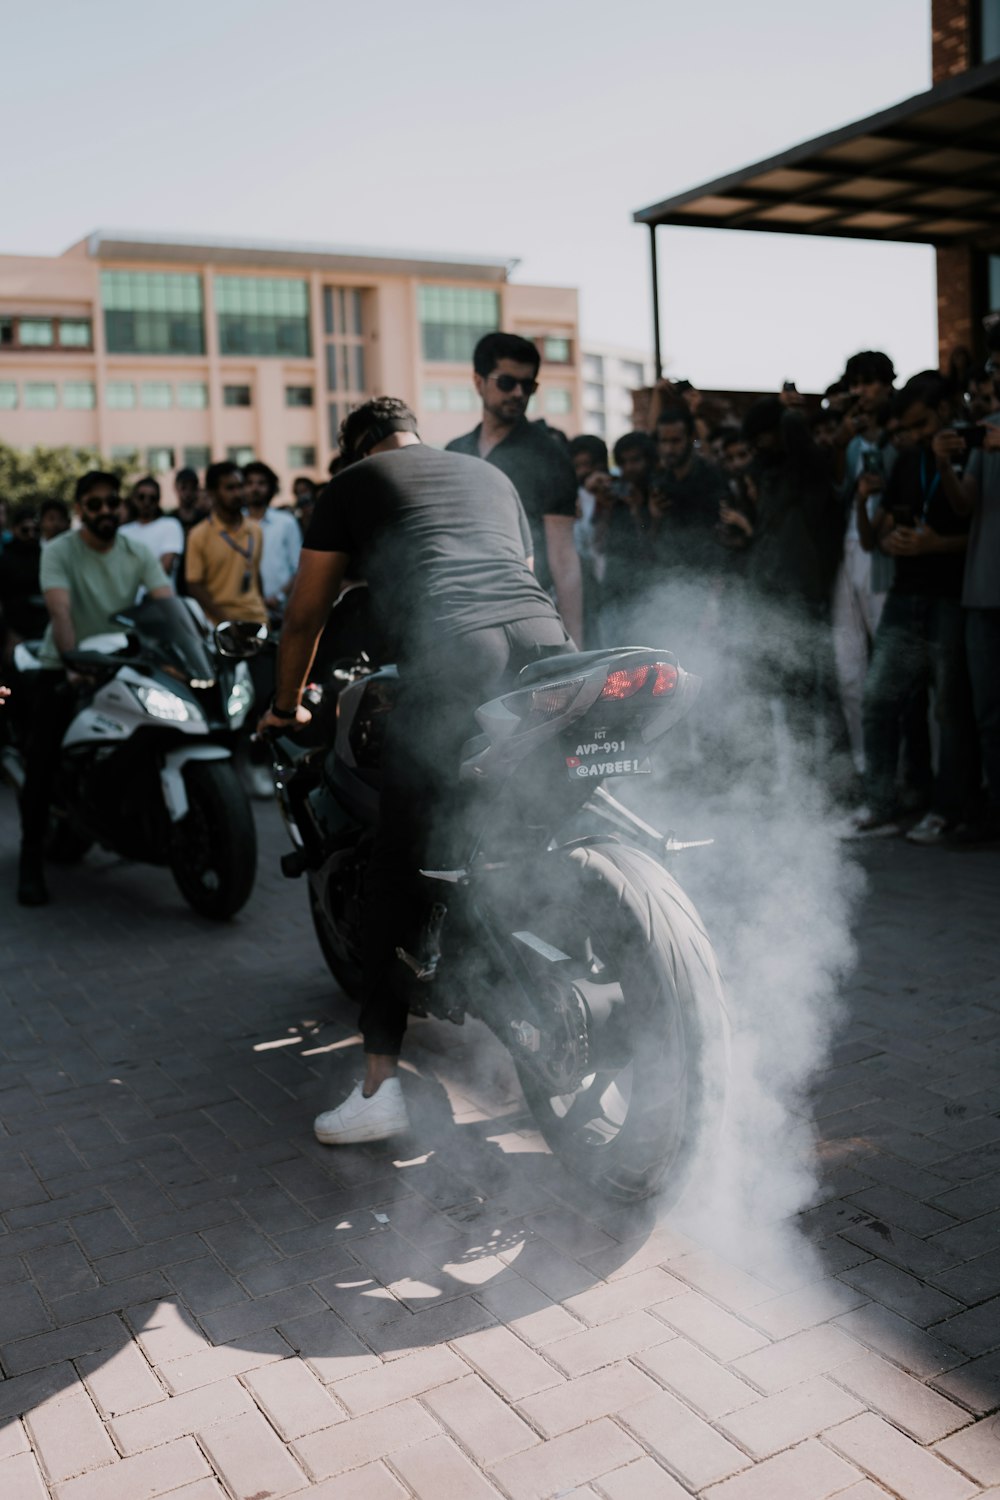 a man riding a motorcycle with a lot of smoke coming out of it